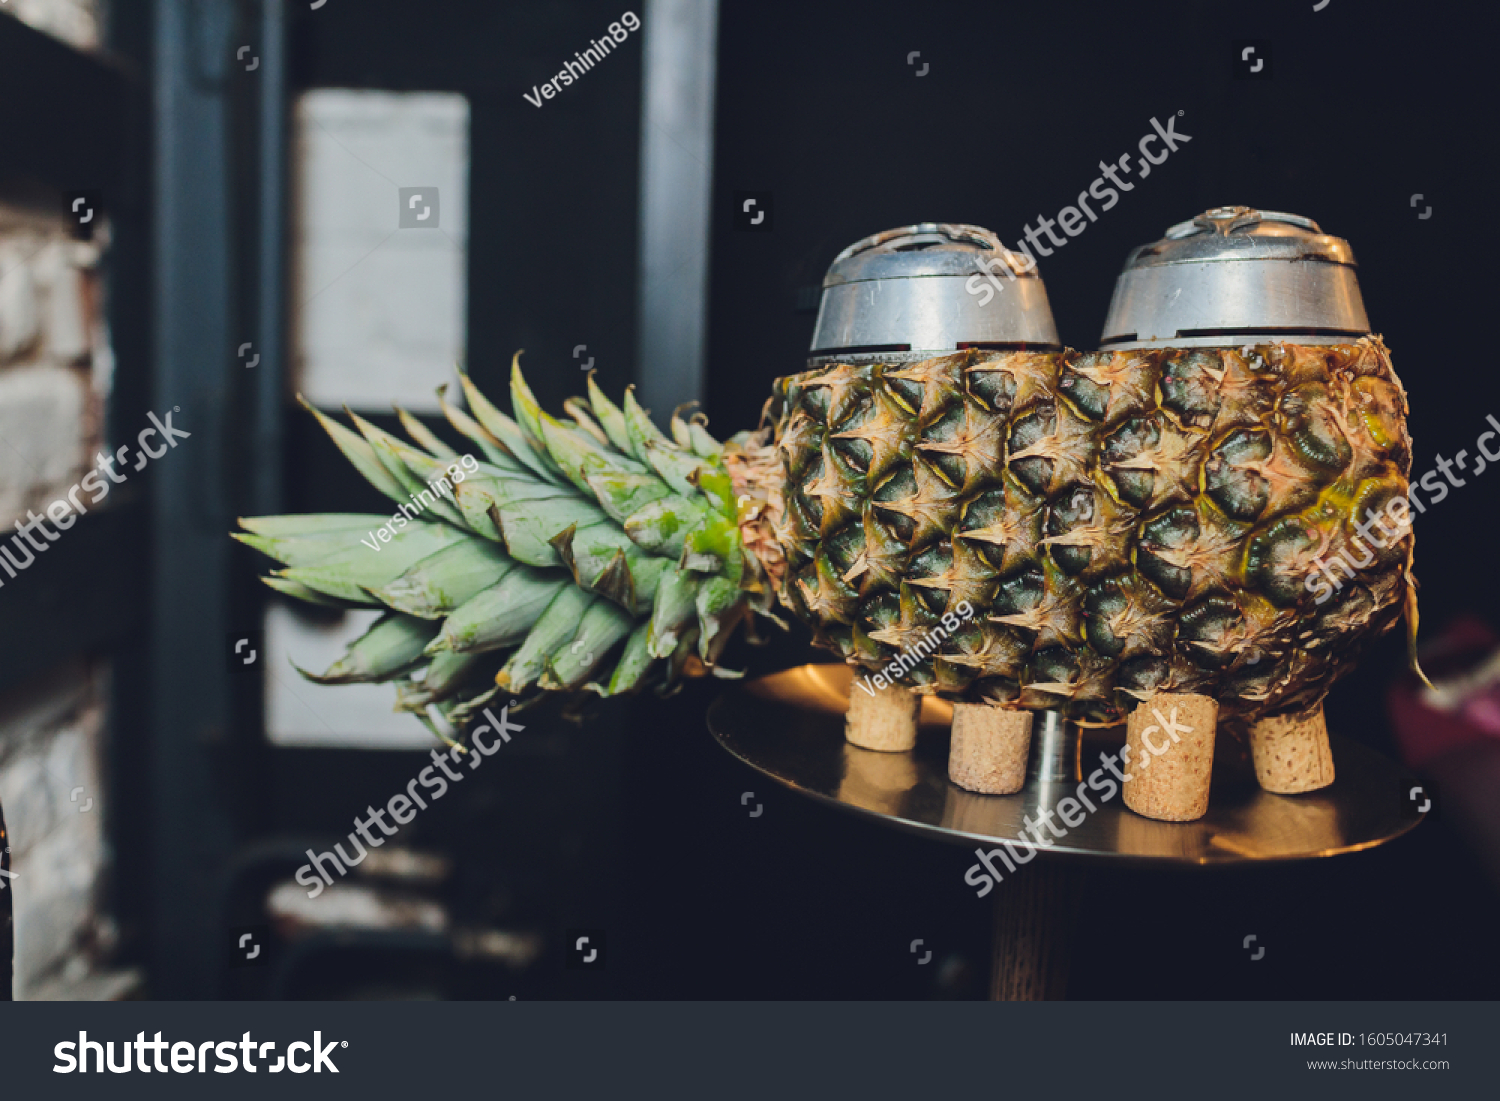 Luxury hookah with pineapple. Exotic bowl with fruit. Hookah lounge. Fruits and coals. Glamours relax. Narghile and water pipe. #1605047341